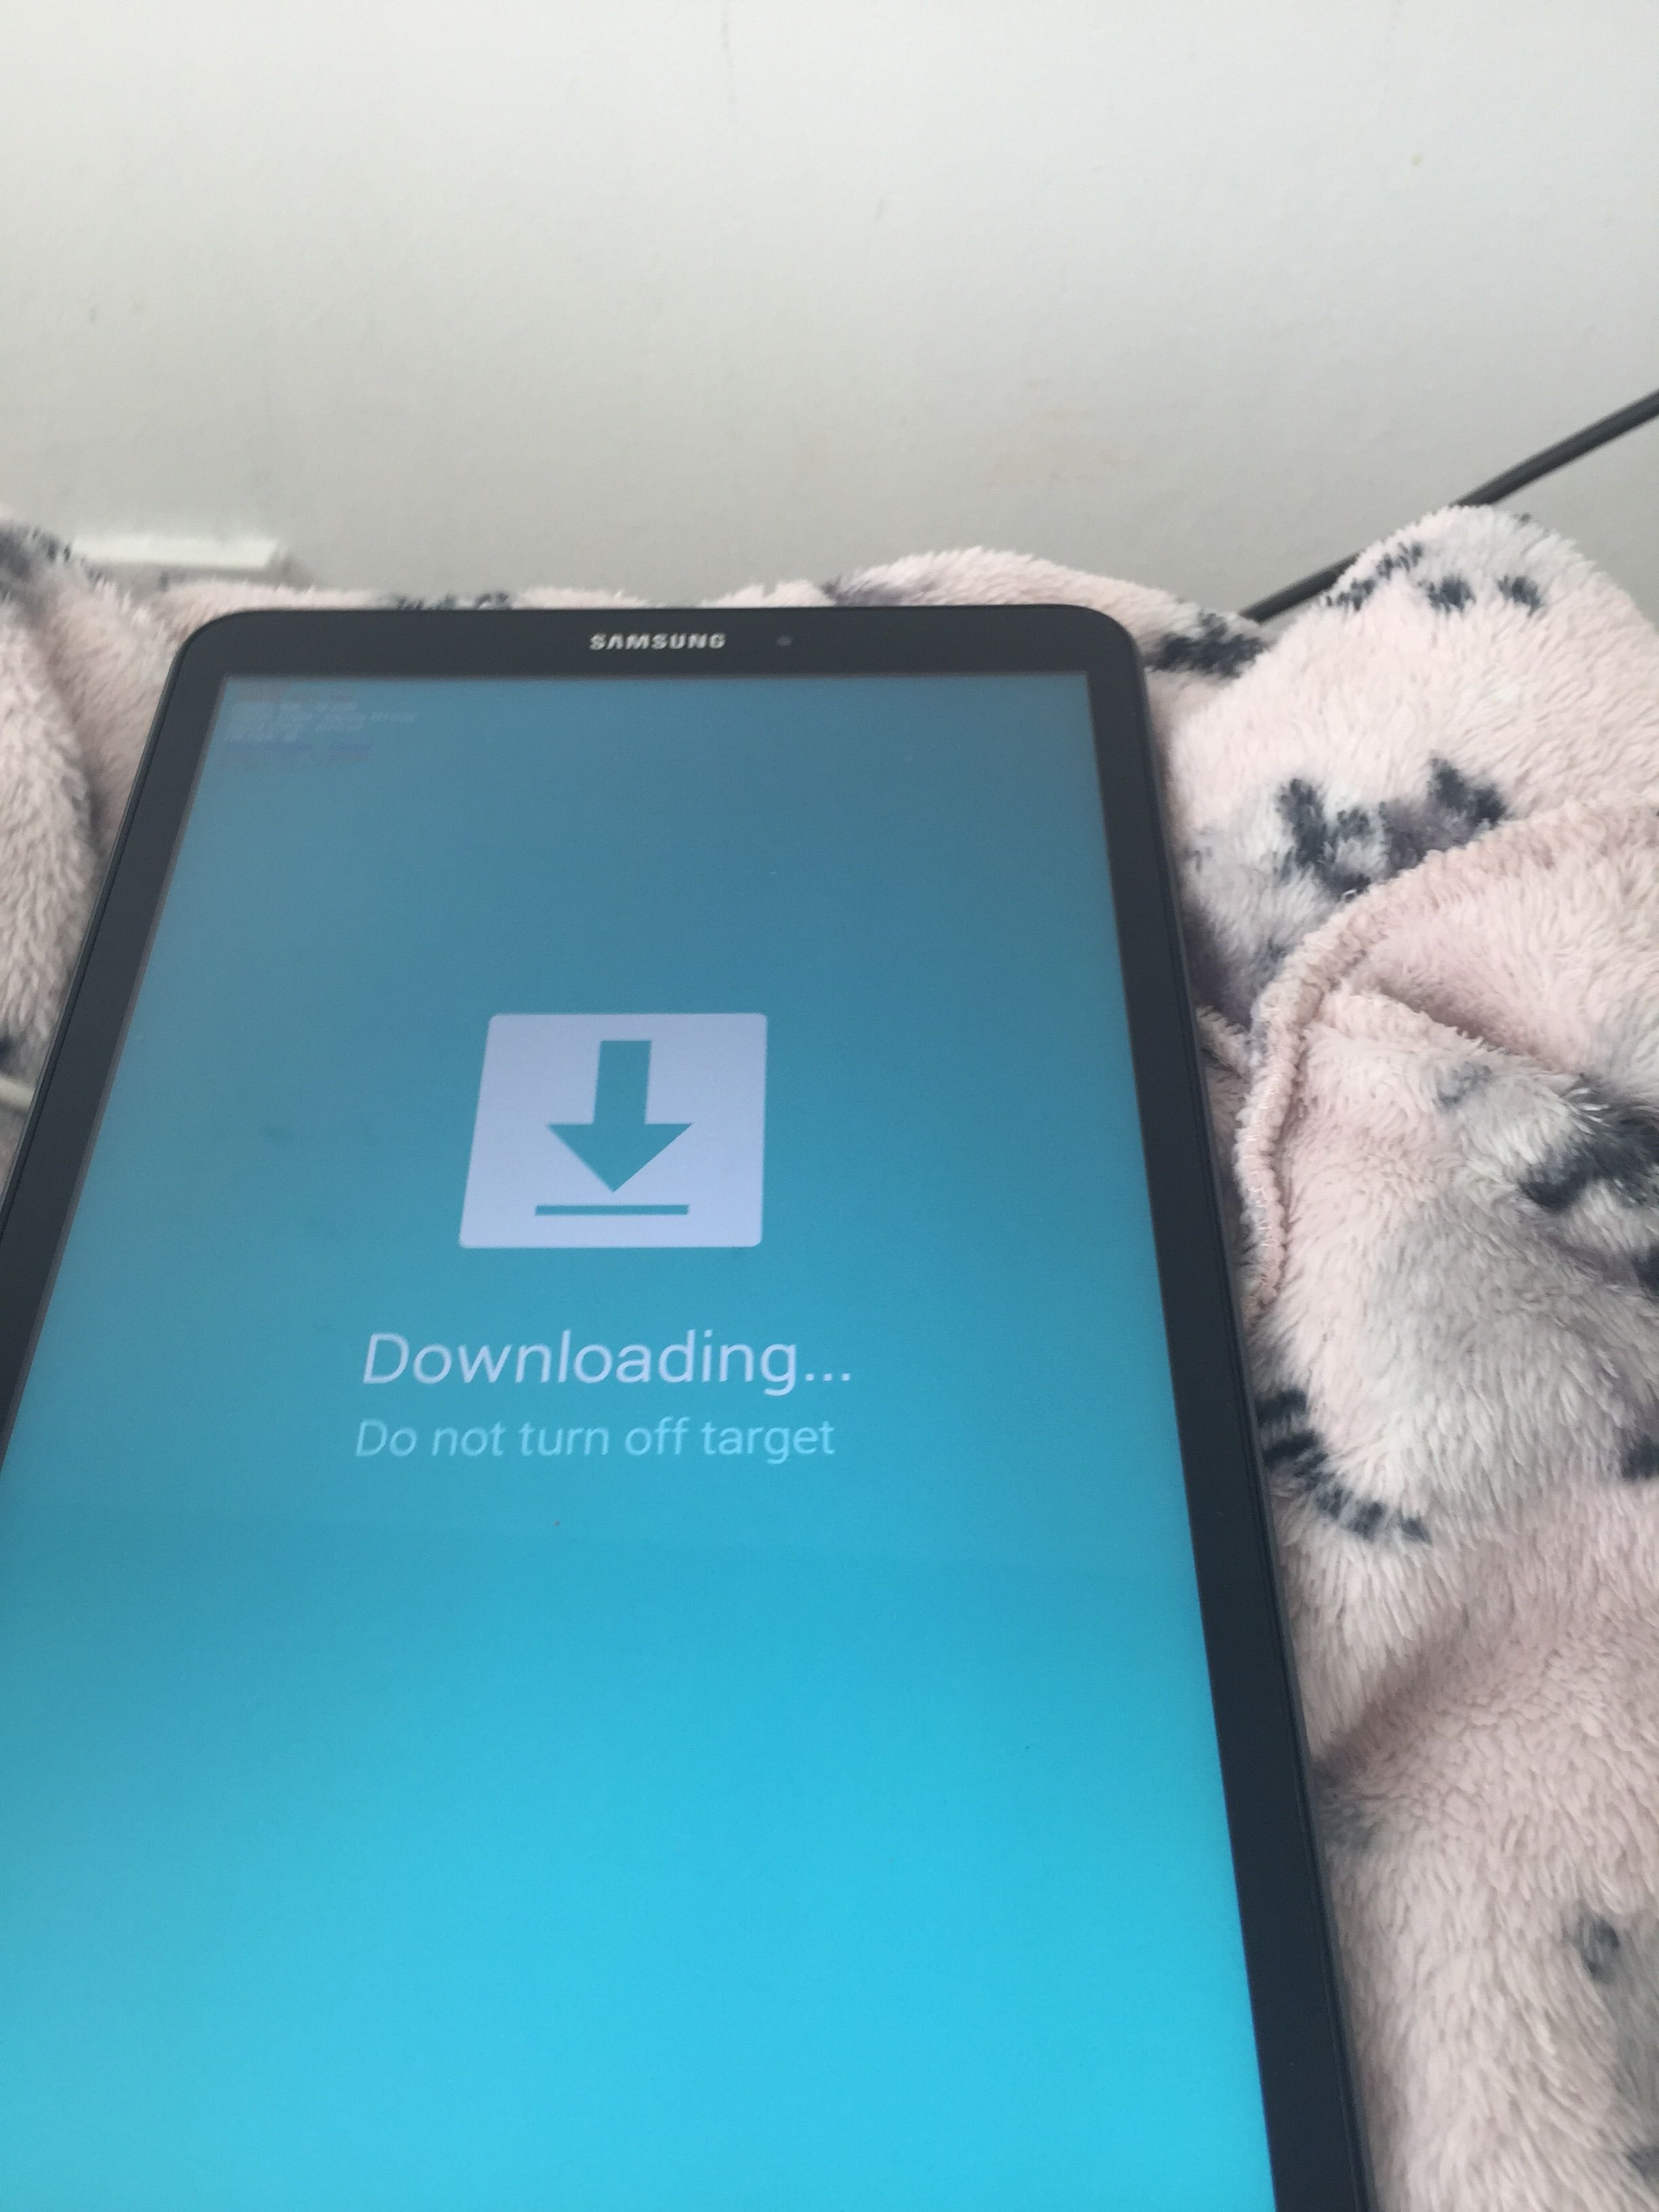 Galaxy Tab won't unlock with pin , used power and volume , now have a  screen telling me it's downloading and not to turn off - Samsung Community